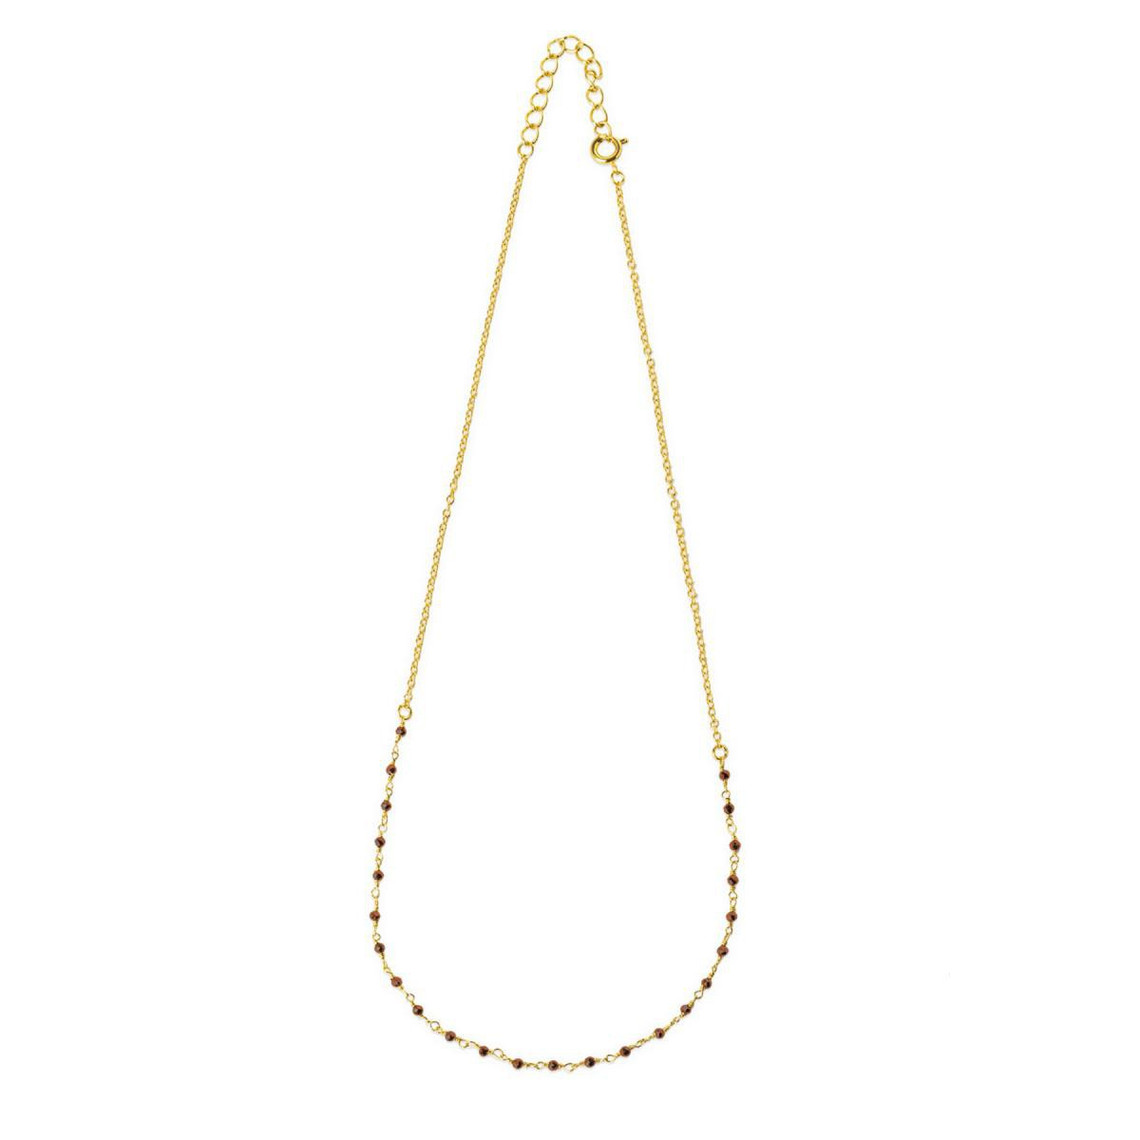 Collier femme LOD021300G Plaqué Or 750/1000 Lovely Day